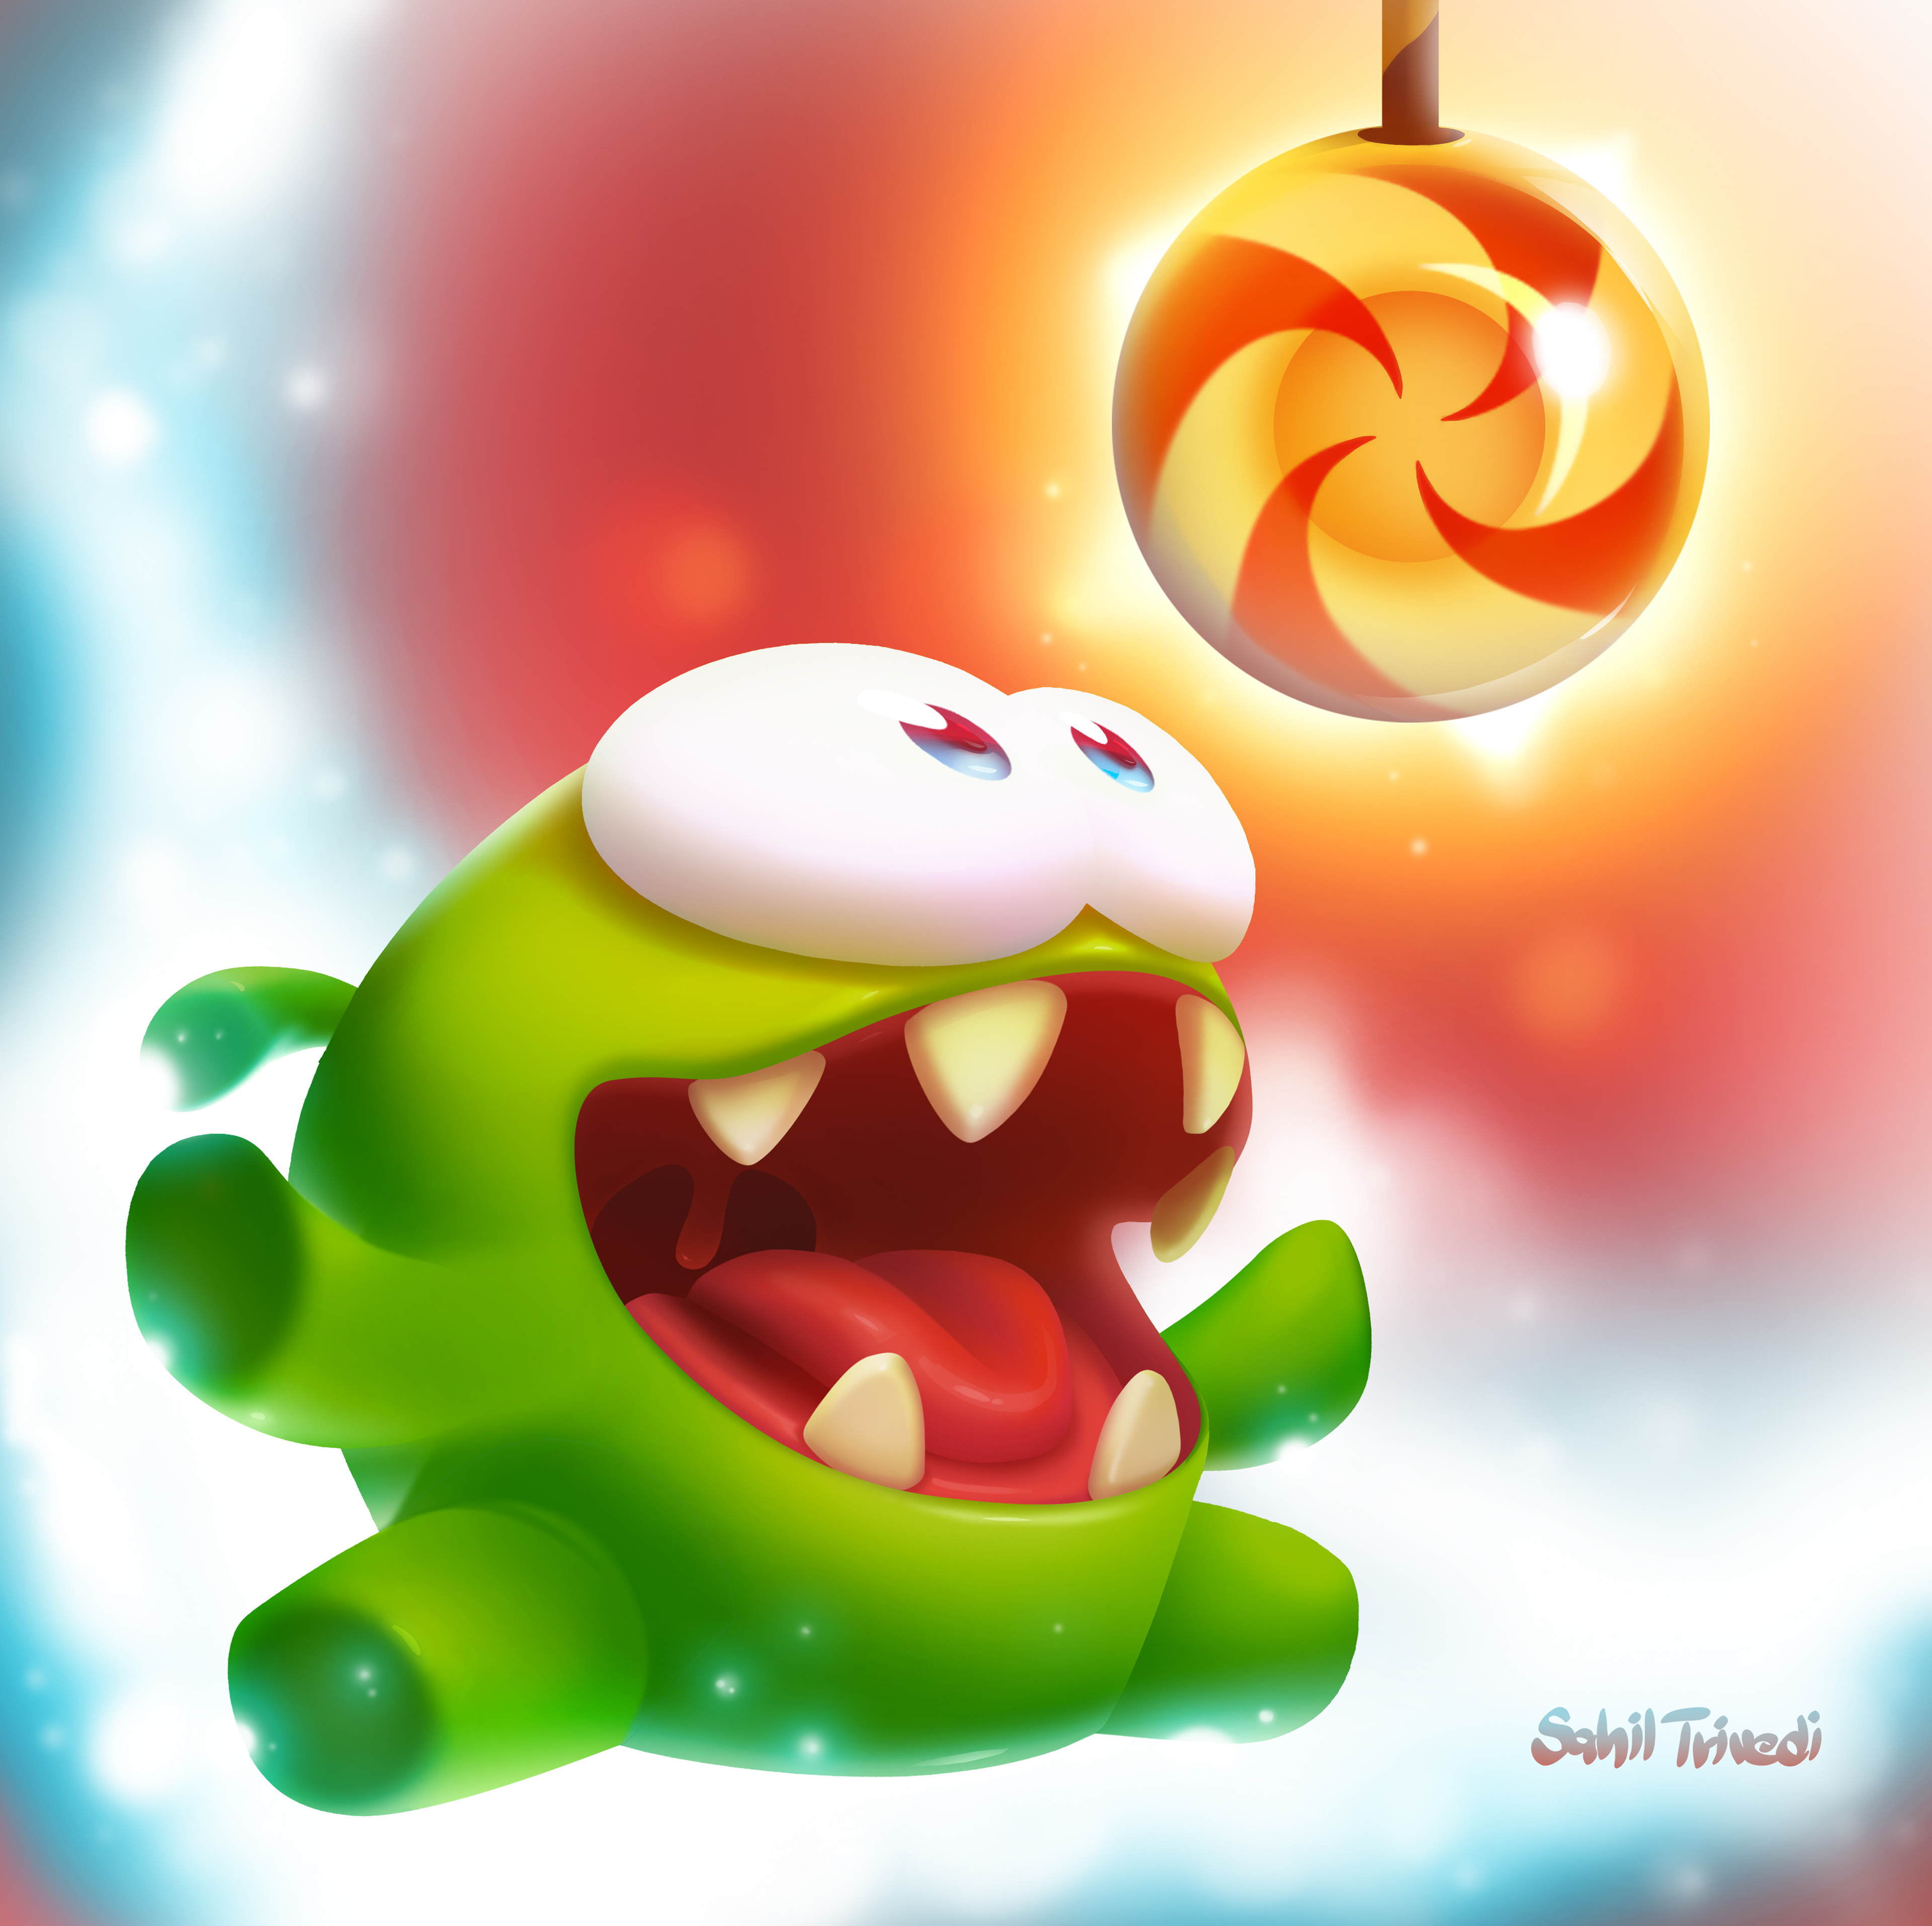 Cut The Rope on Behance